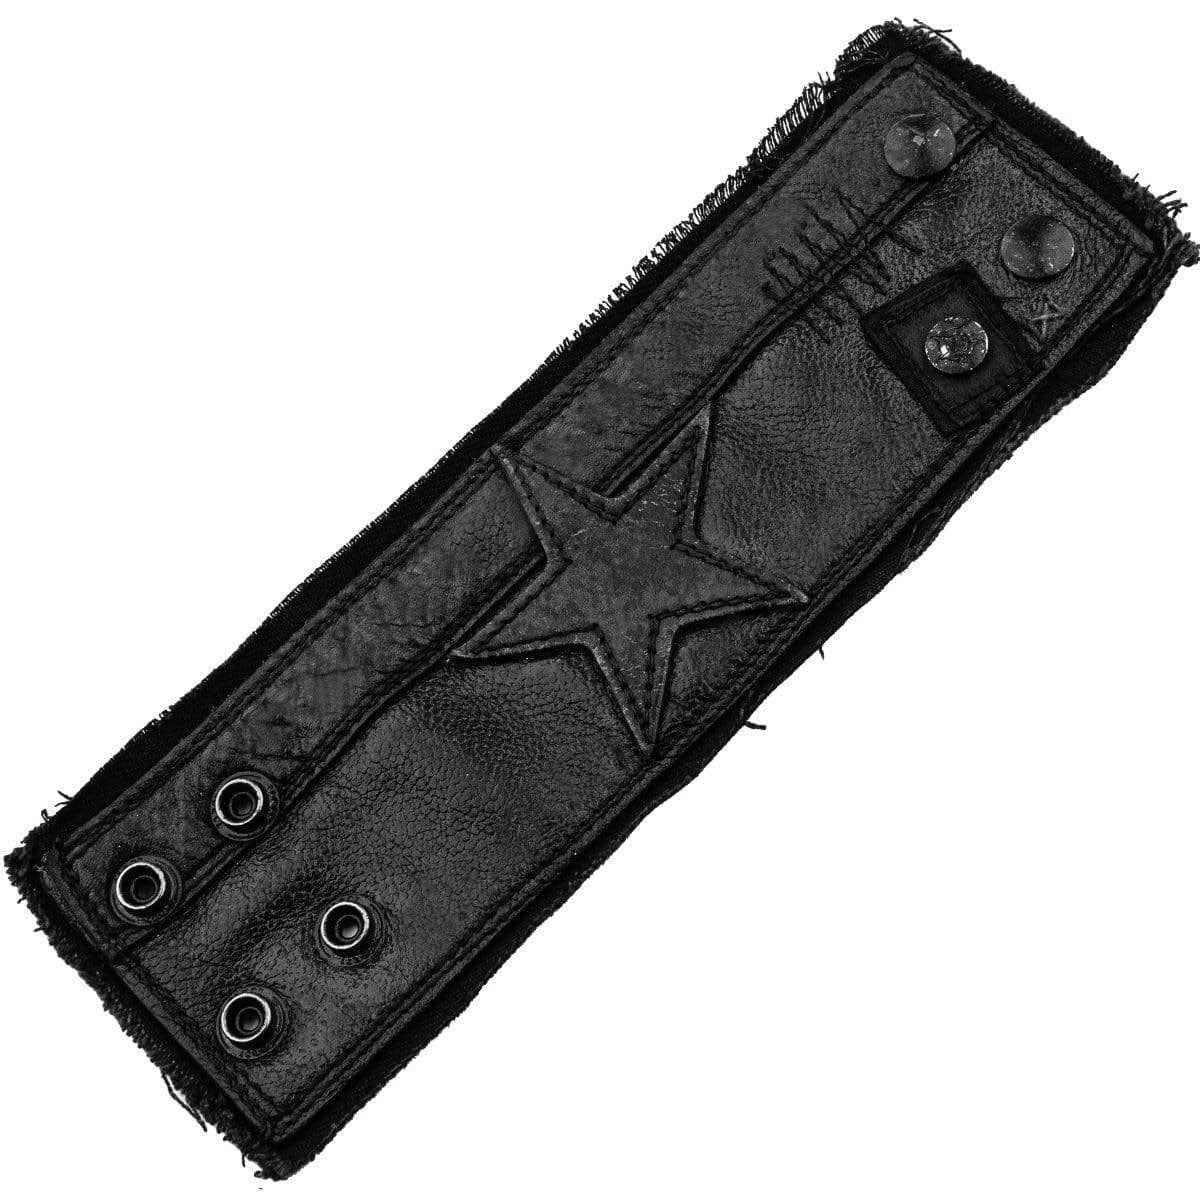 • Wornstar Custom Salvaged Collection• Custom leather wrist band• Completely hand-made at time of order• Designed, made, and sold exclusively by Wornstar Clothing• Individually made; each one will vary slightly• Made with soft leather• Lined with fabric for comfort• Hand-stitched detail• Hand-painted• Hand-distressed• 